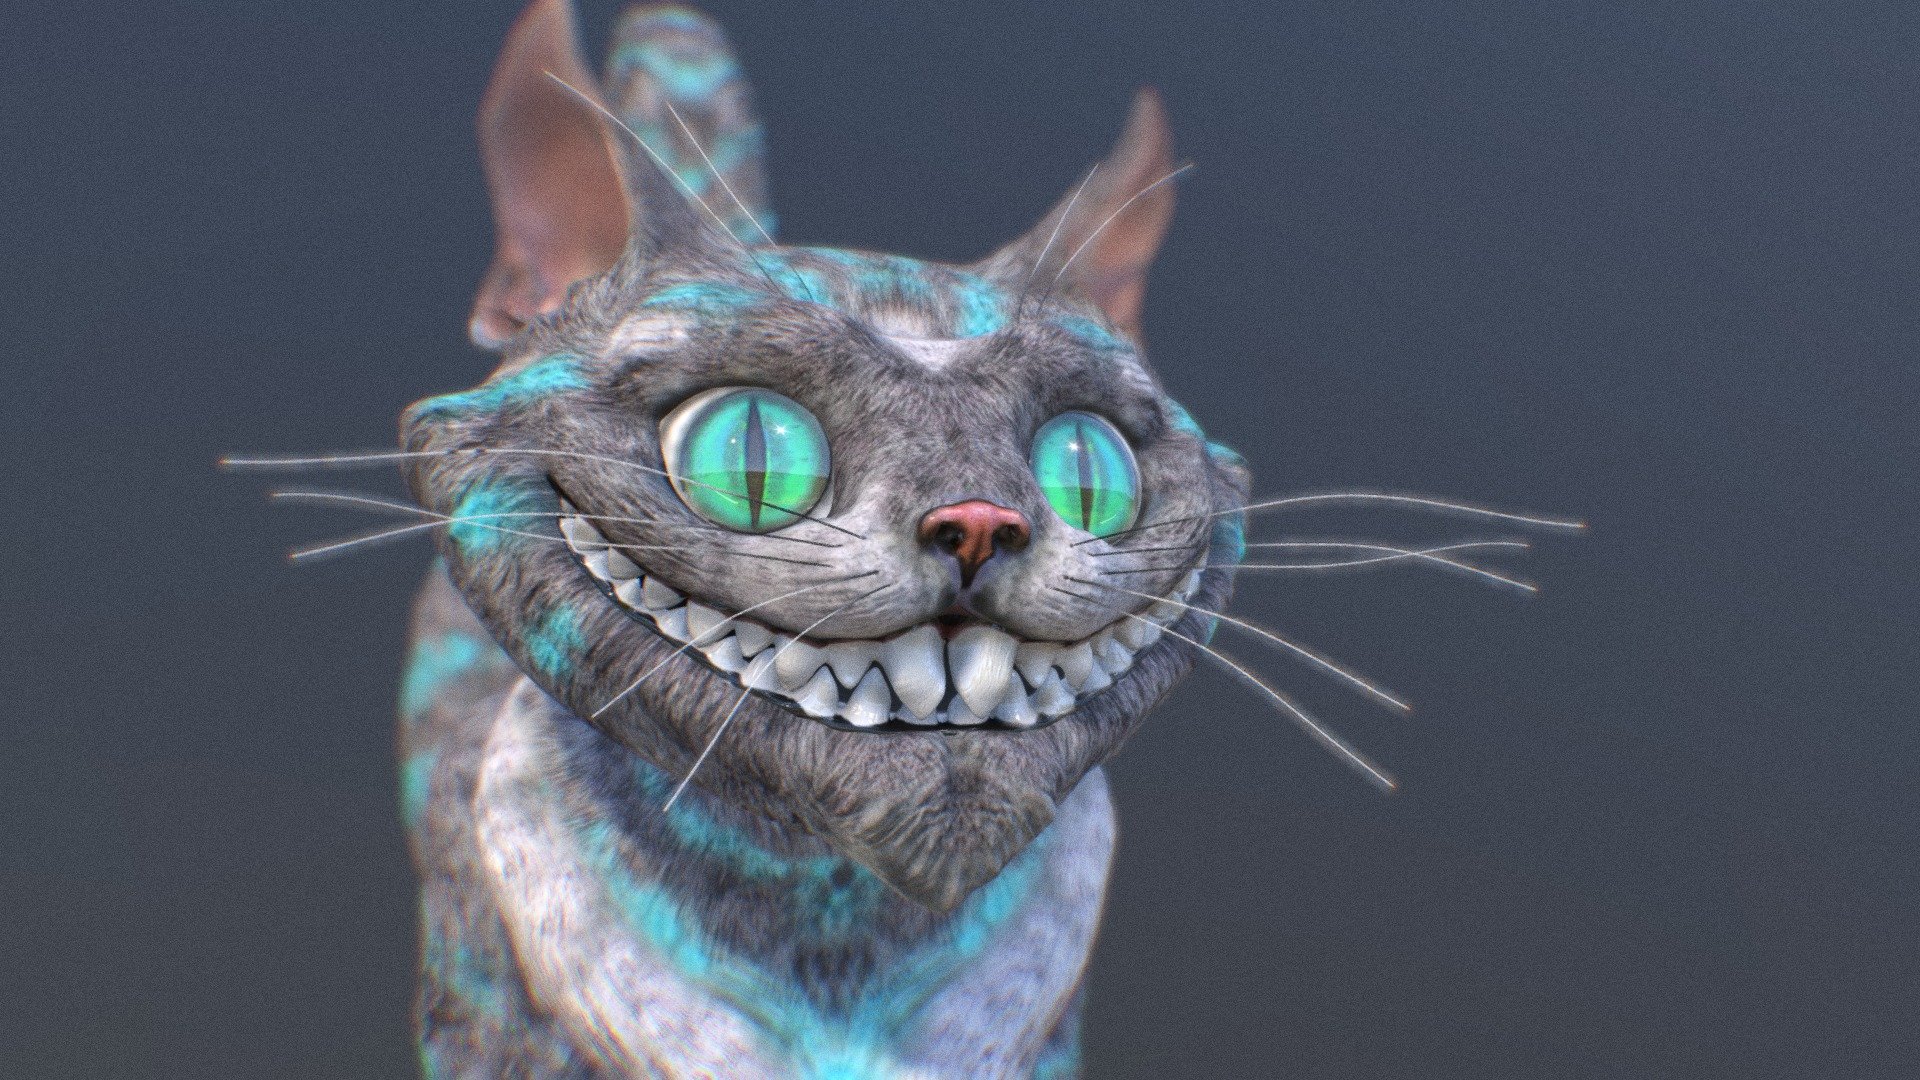 Cheshire Cat V02 - My Zbrush model
Additional files included:
1. Optimized 3ds max scene
2. Zbrush high-poly (17mln points) model (5 subtools)
3. Textures - Cheshire Cat V02 - Buy Royalty Free 3D model by VRA (@architect47) 3d model